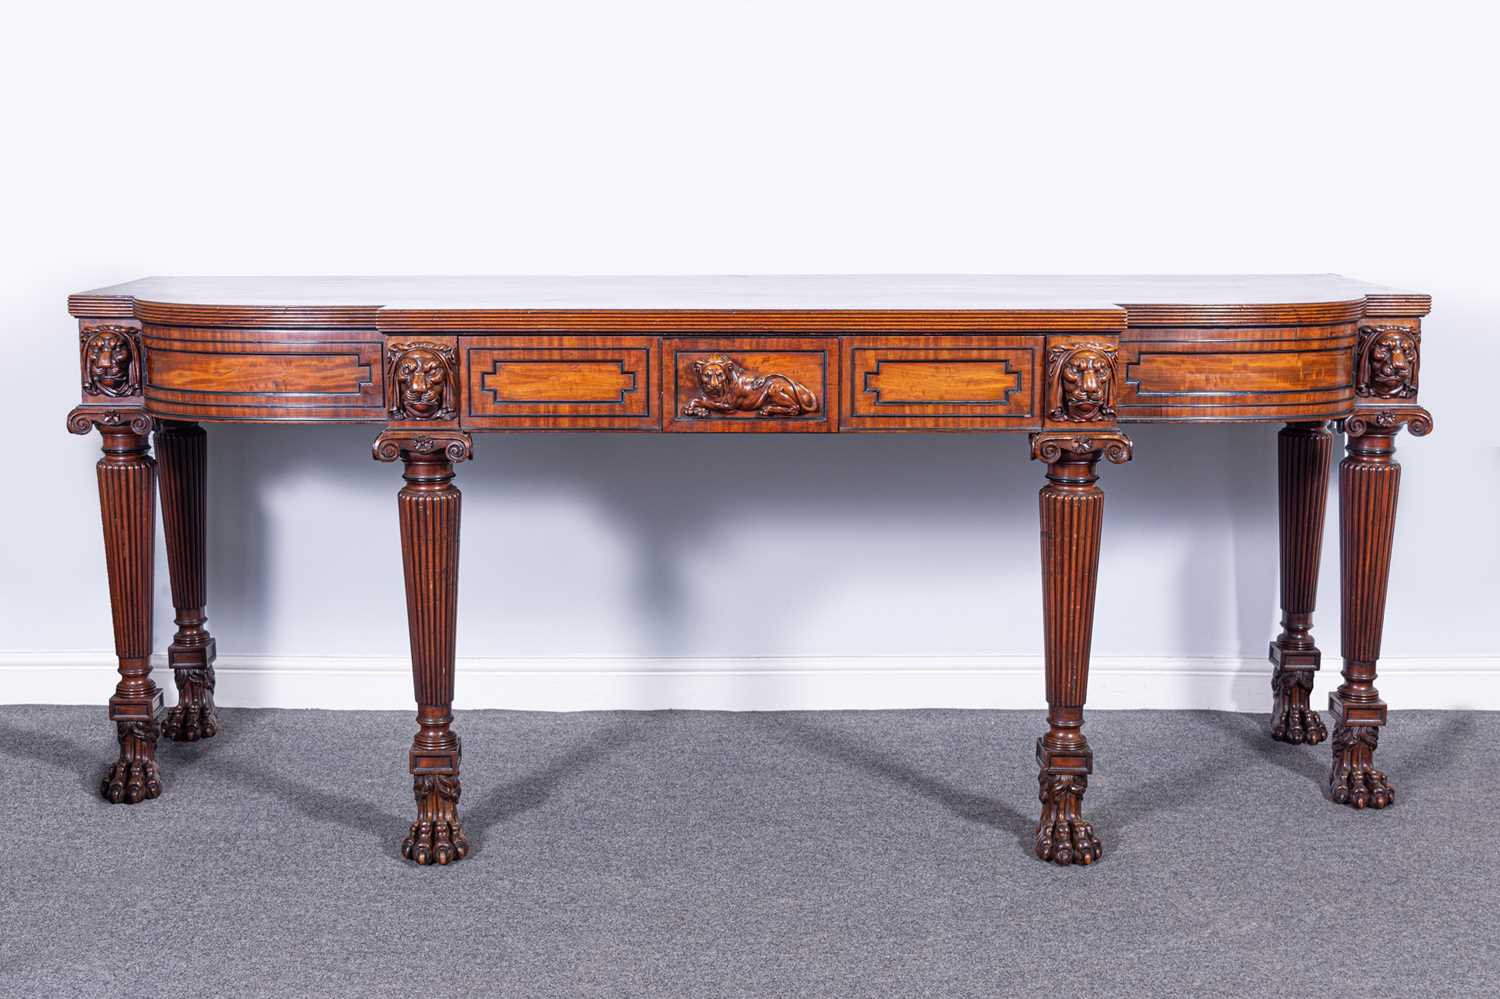 Lot 438 - A George III mahogany breakfront serving table, in the manner of Thomas Hope, circa 1810